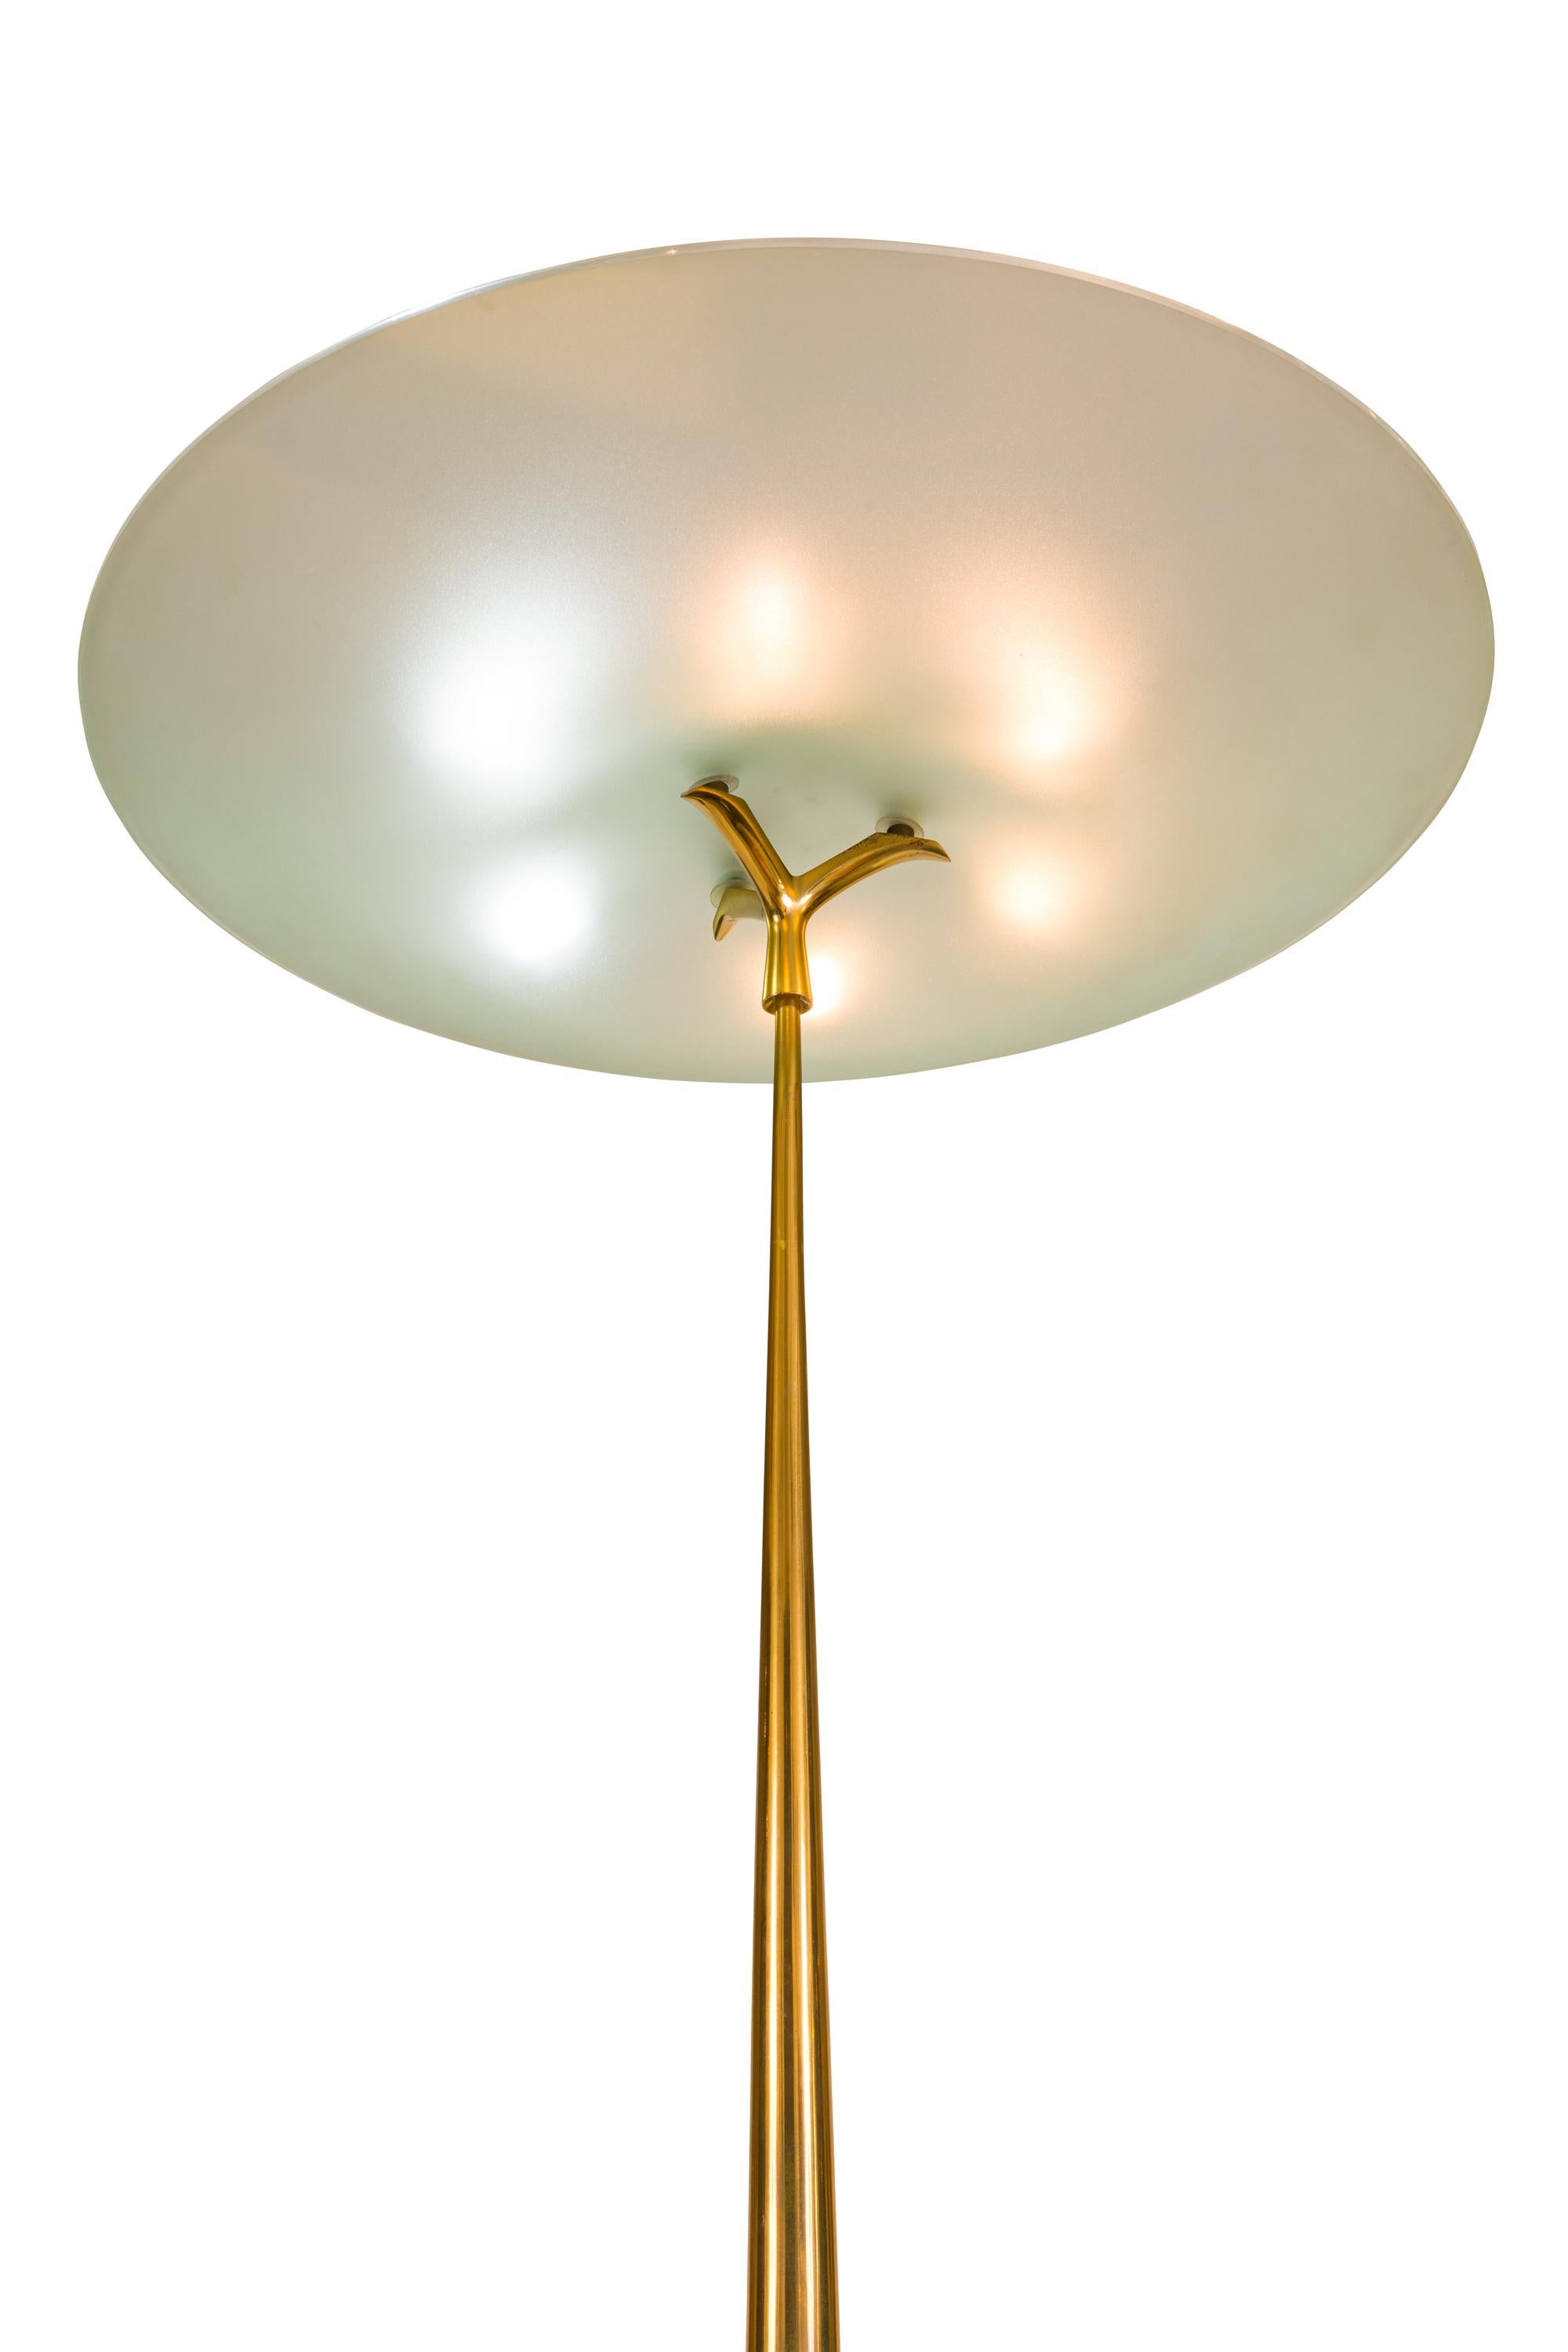 Frosted Max Ingrand Standard Lamp Model 1692 for Fontana Arte, Italy, 1959